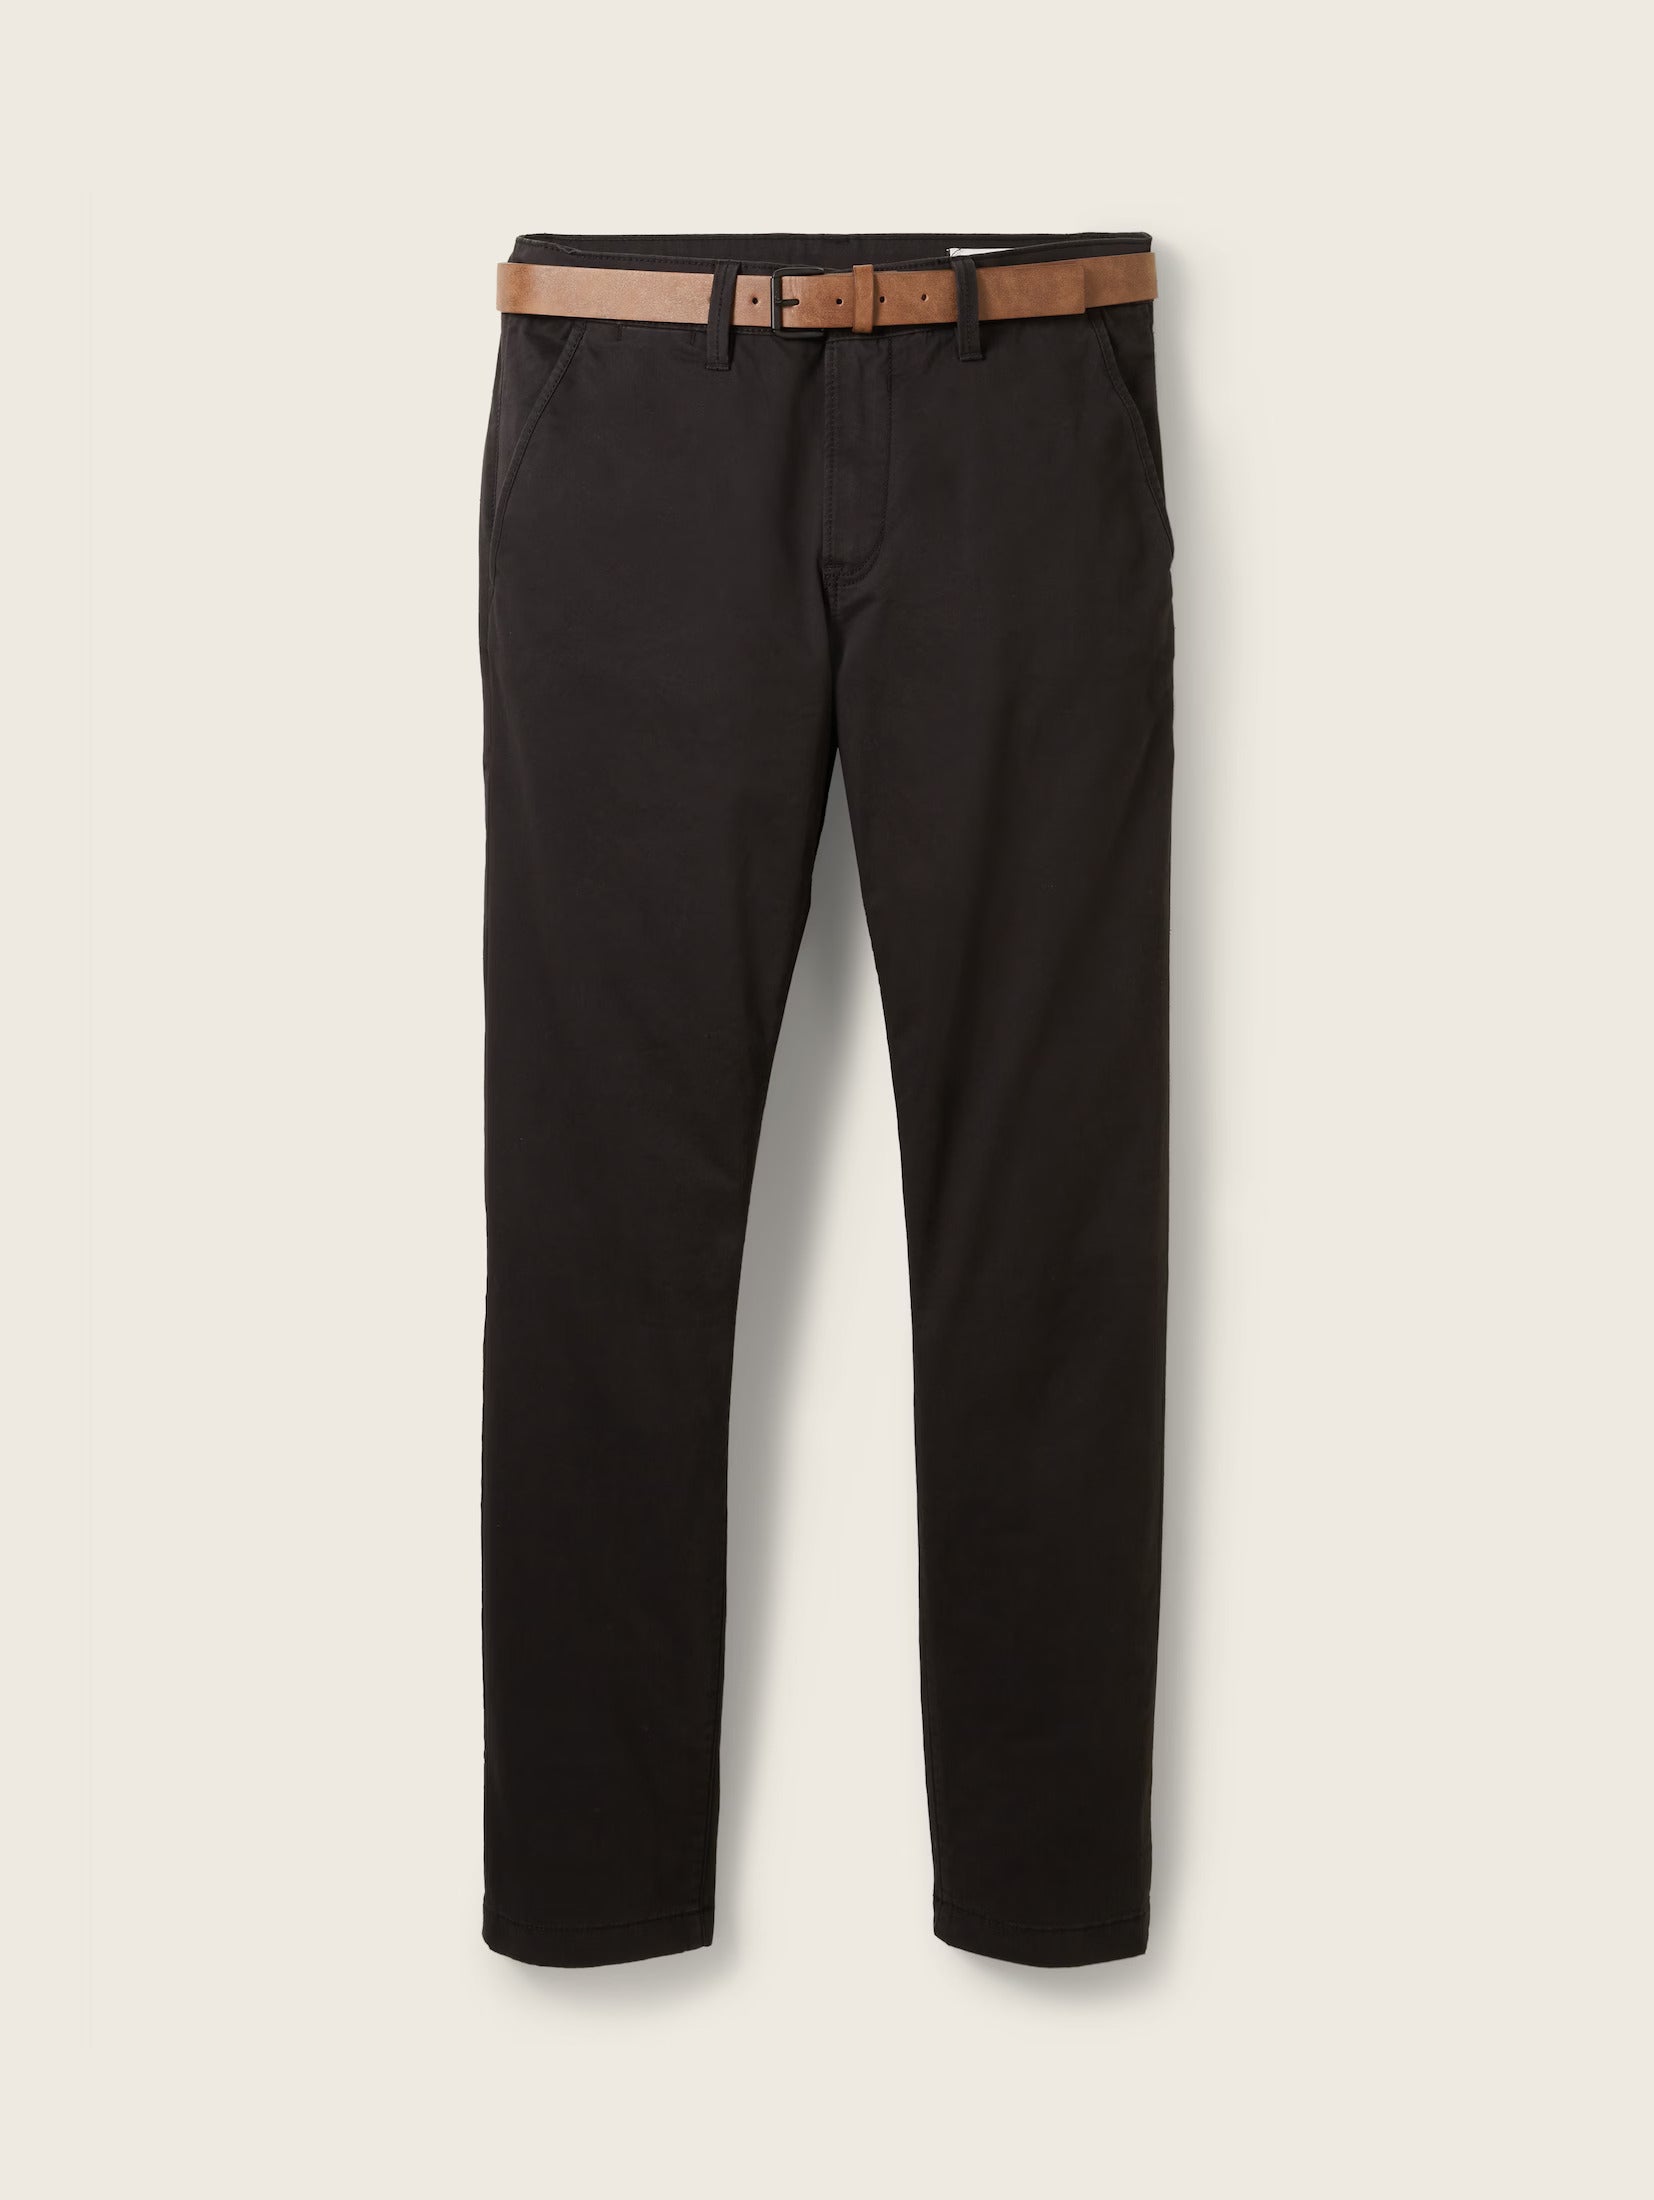 Tom Tailor Black Chino With A Belt